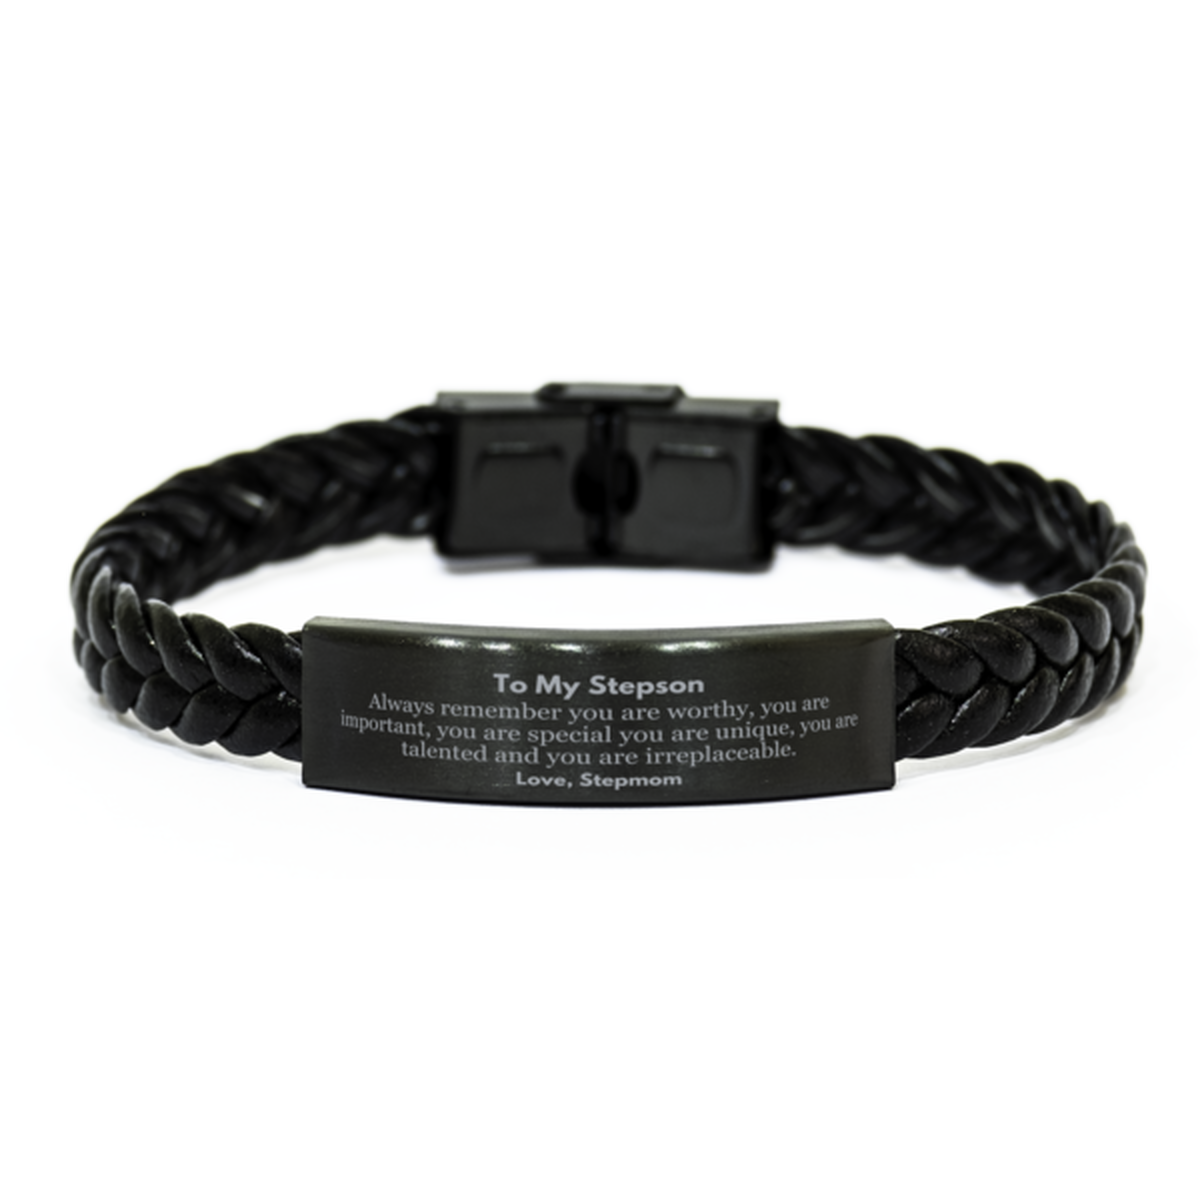 Stepson Birthday Gifts from Stepmom, Inspirational Braided Leather Bracelet for Stepson Christmas Graduation Gifts for Stepson Always remember you are worthy, you are important. Love, Stepmom